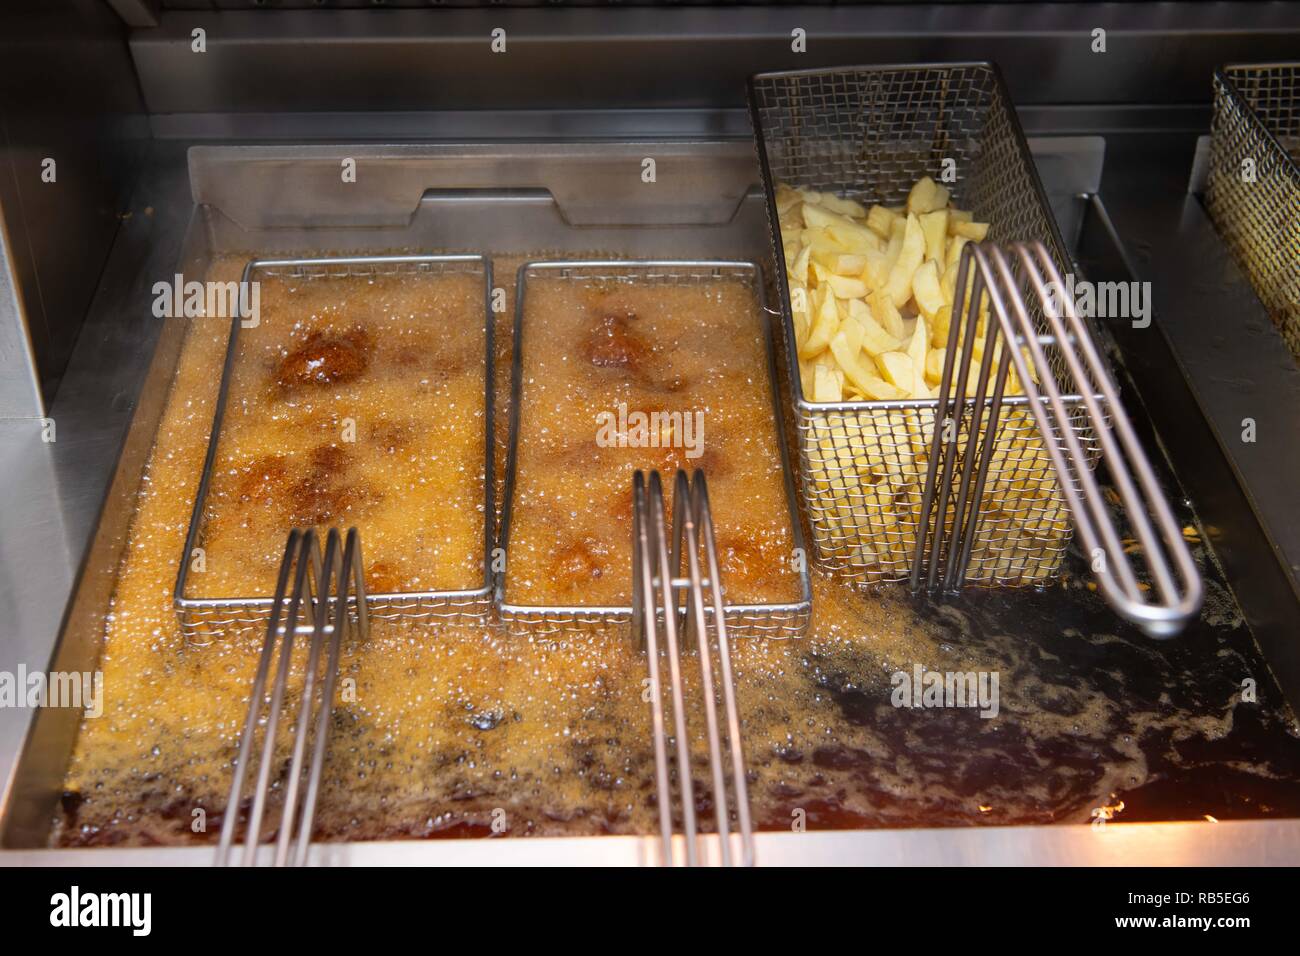 https://c8.alamy.com/comp/RB5EG6/potato-chips-ready-to-cook-in-a-deep-fat-fryer-in-a-chip-shop-in-the-uk-RB5EG6.jpg